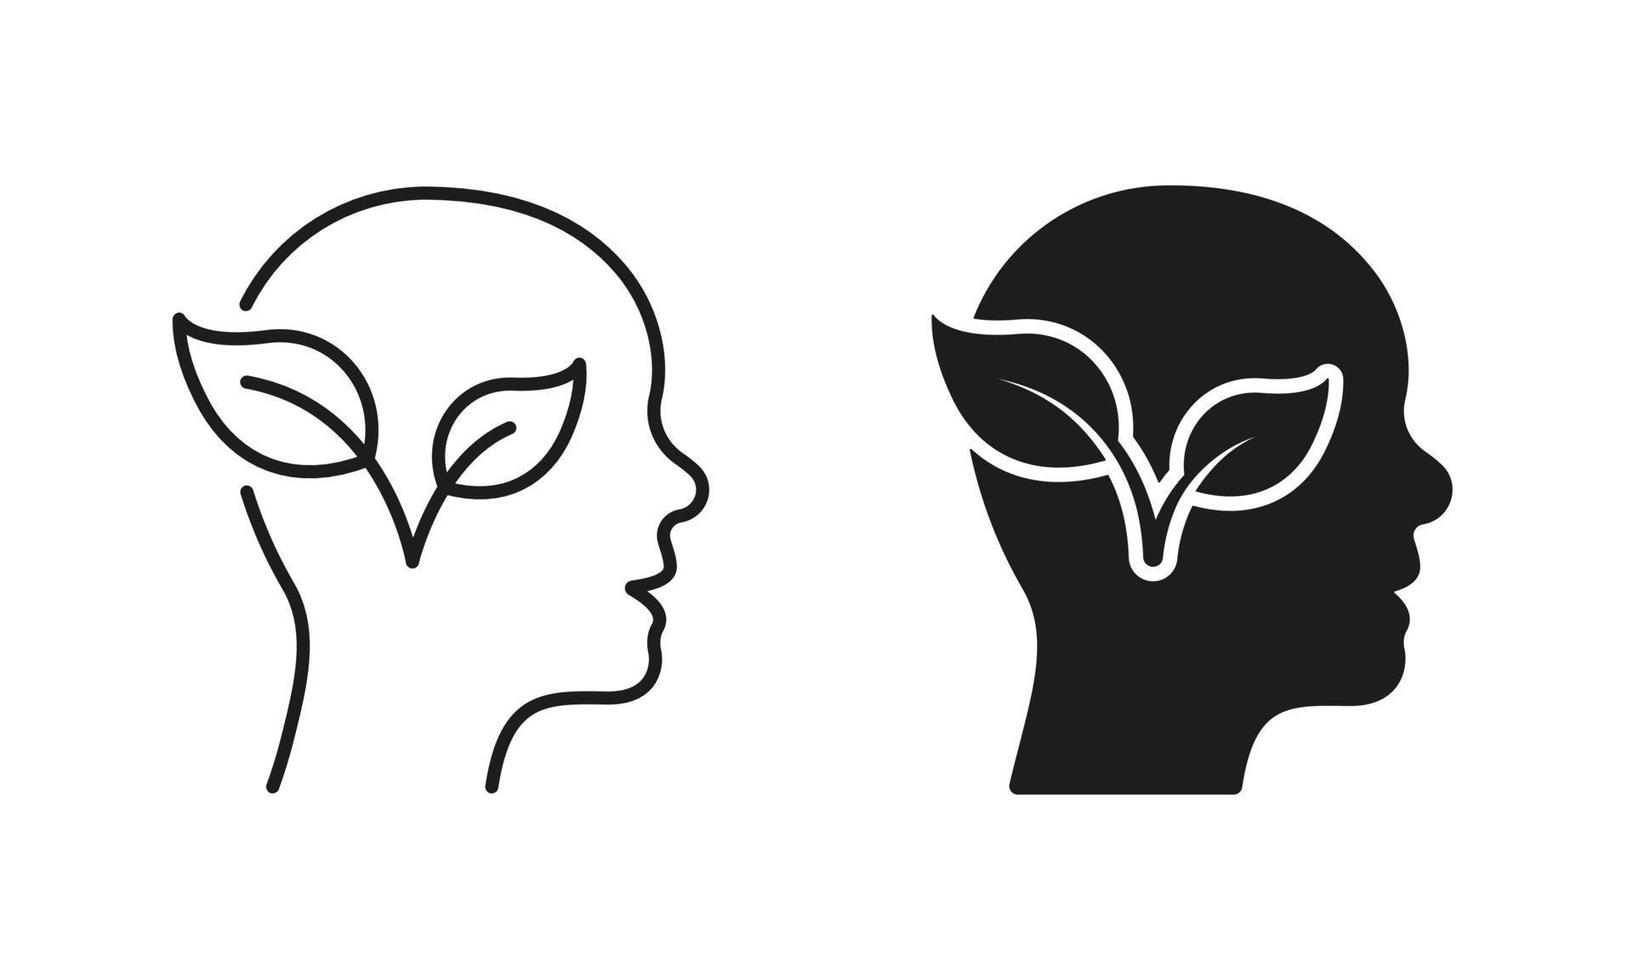 Ecology Idea Pictogram. Plant in Human Head, Green Thinking Symbol Collection on White Background. Leaf and Person Brain Environment Concept Line and Silhouette Icon Set. Isolated Vector Illustration.